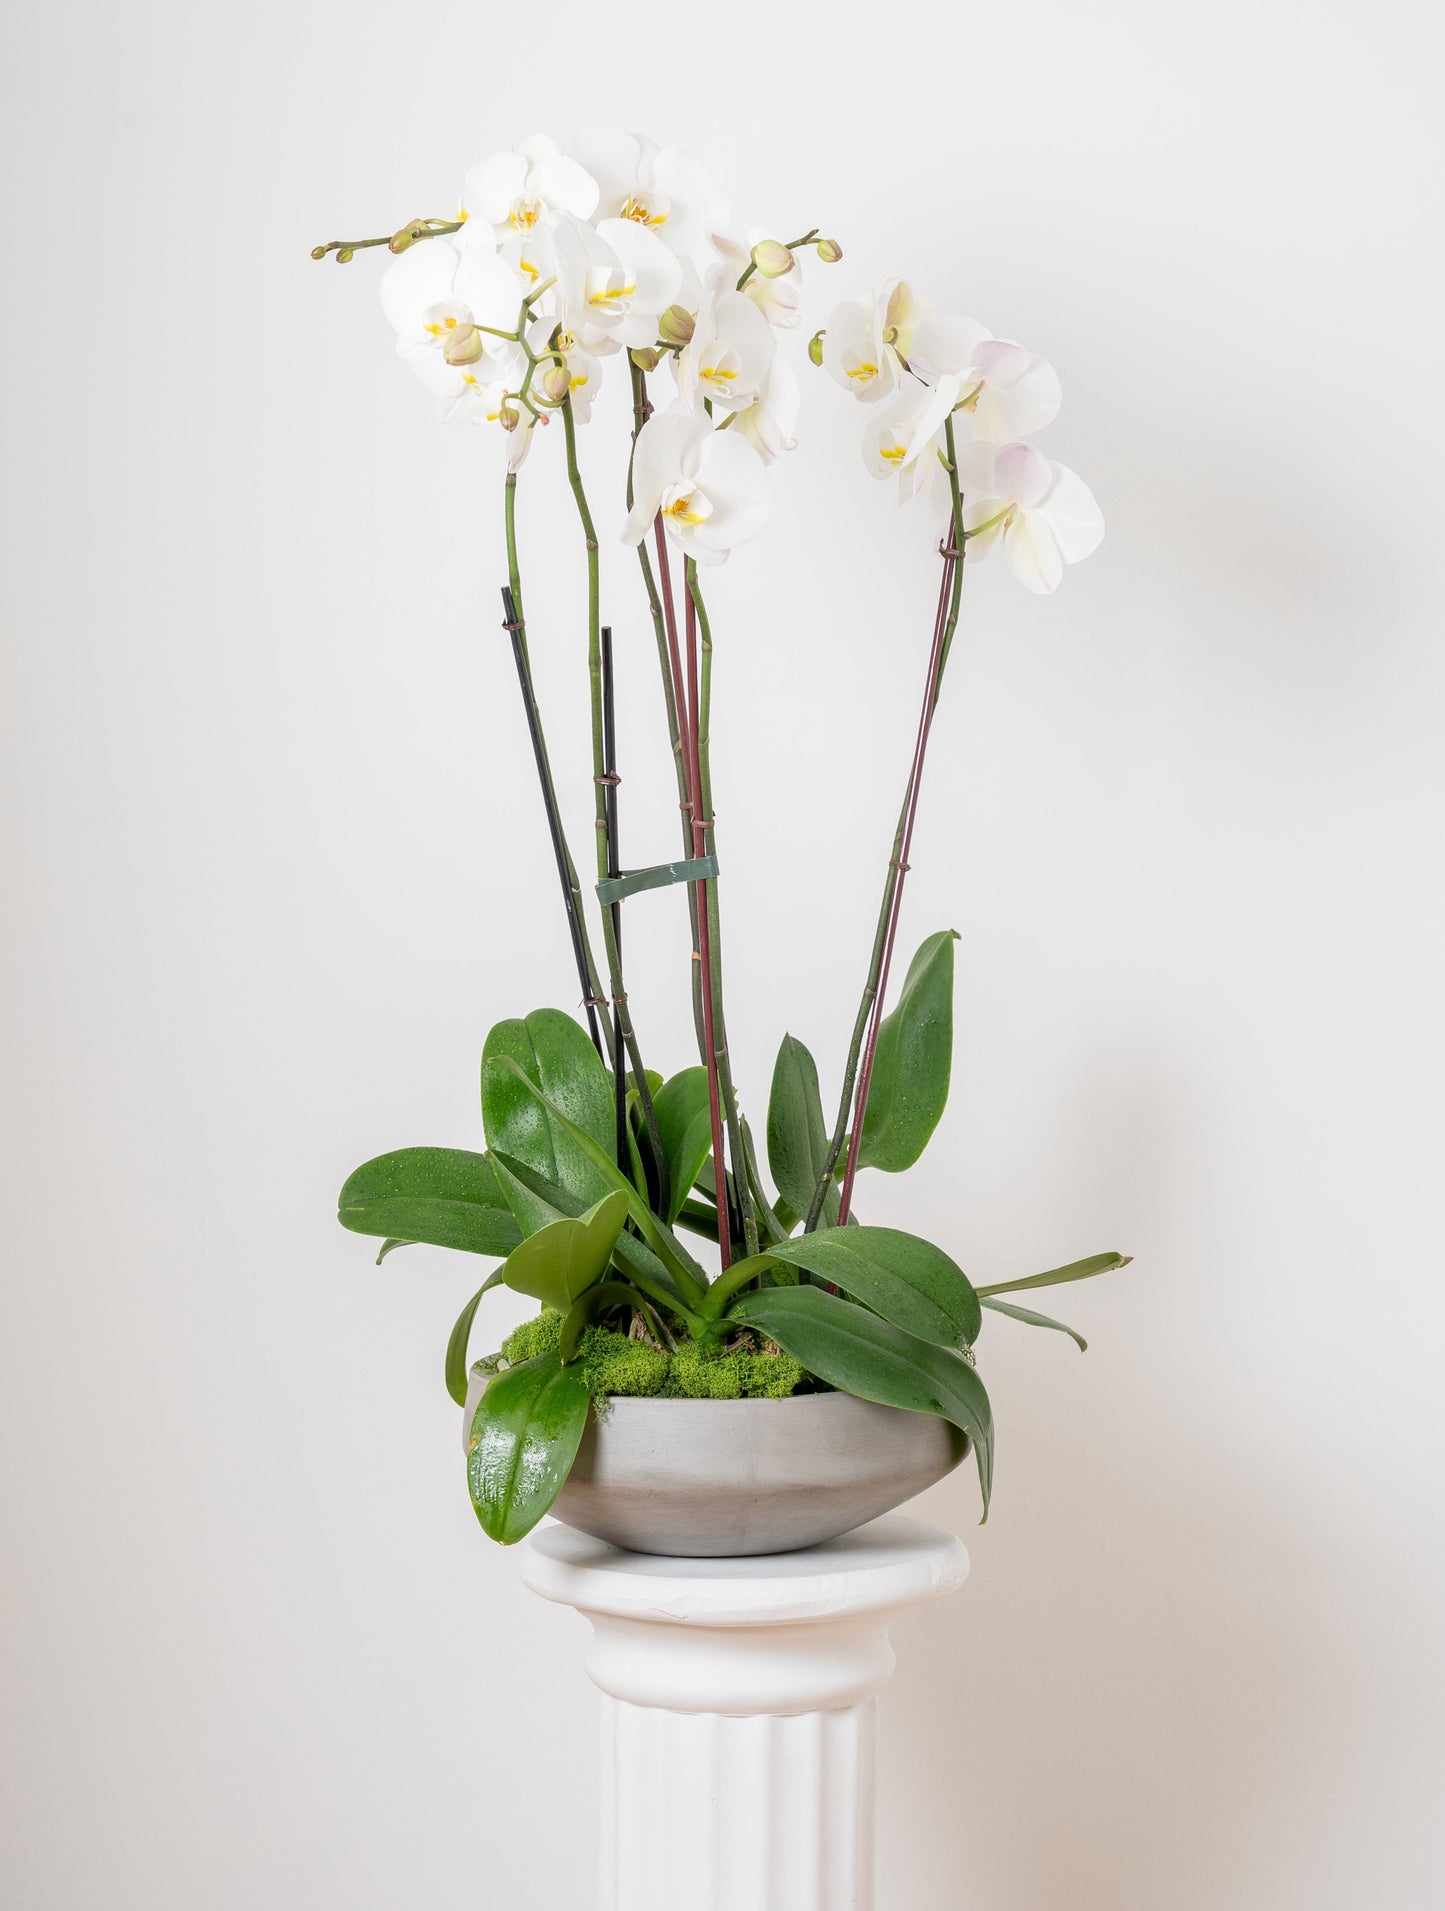 Orchid-inary Beauty